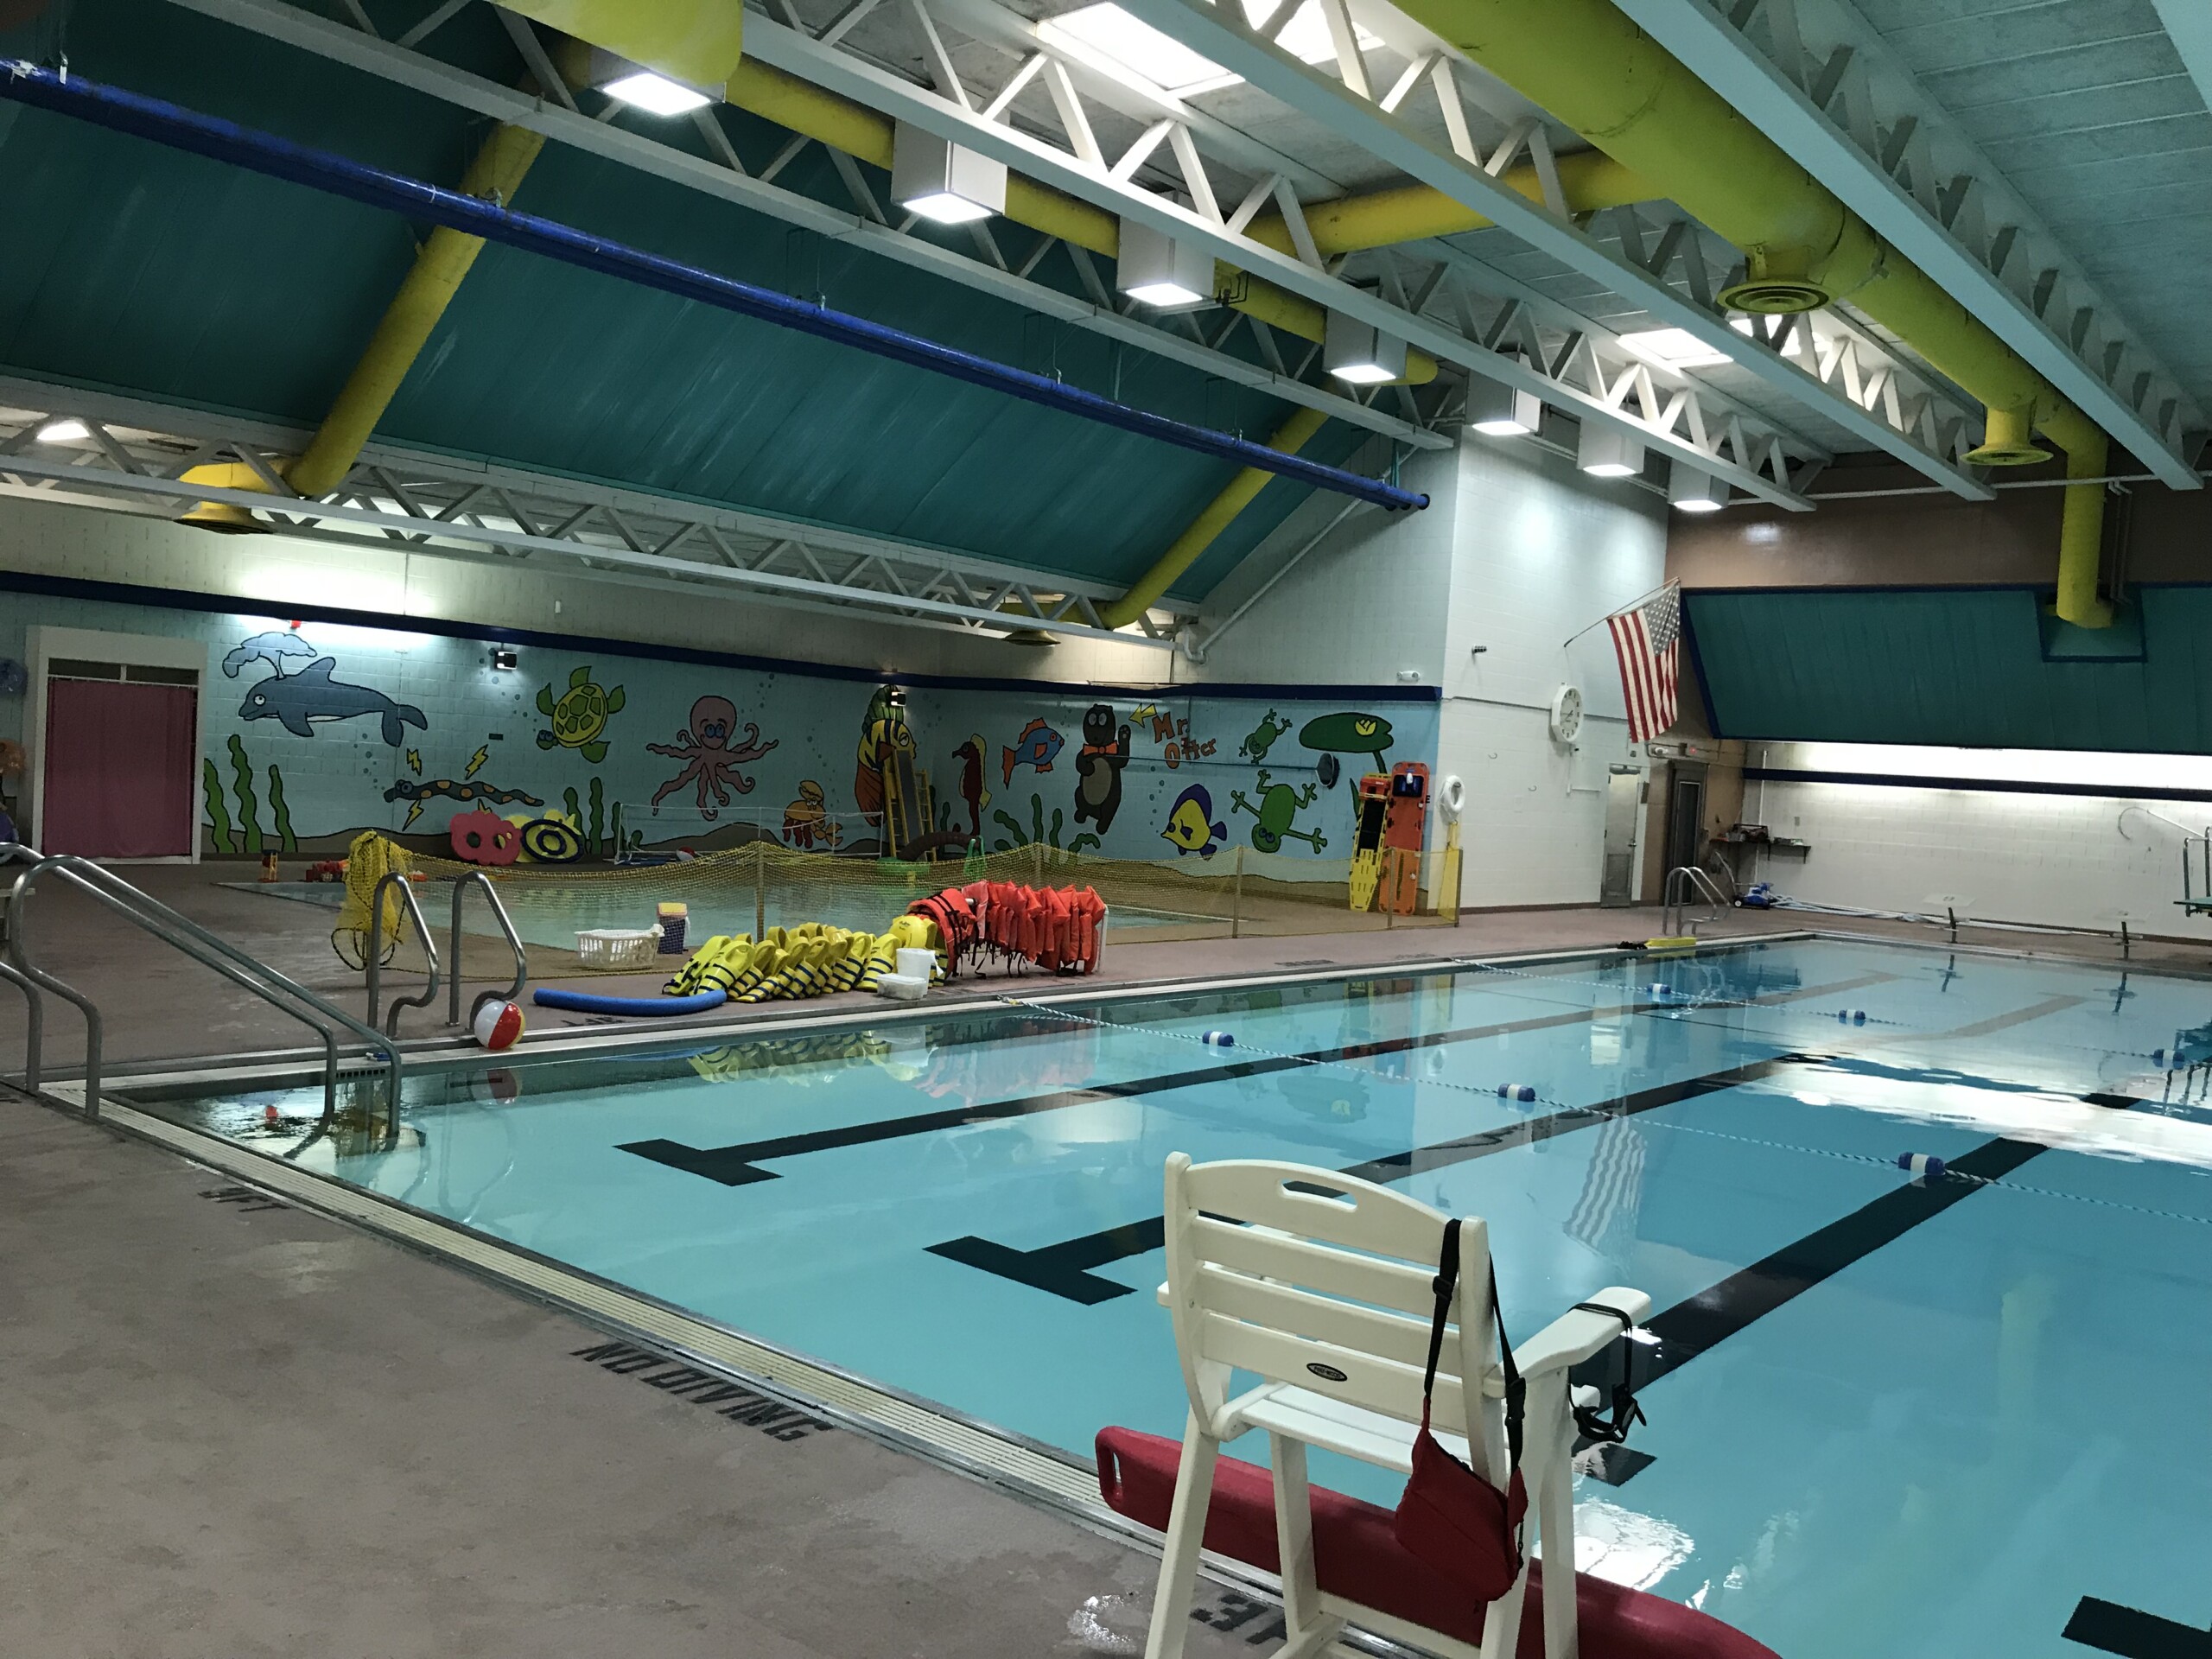 The large, heated pool and baby pool inside the aquatics center at West Central School